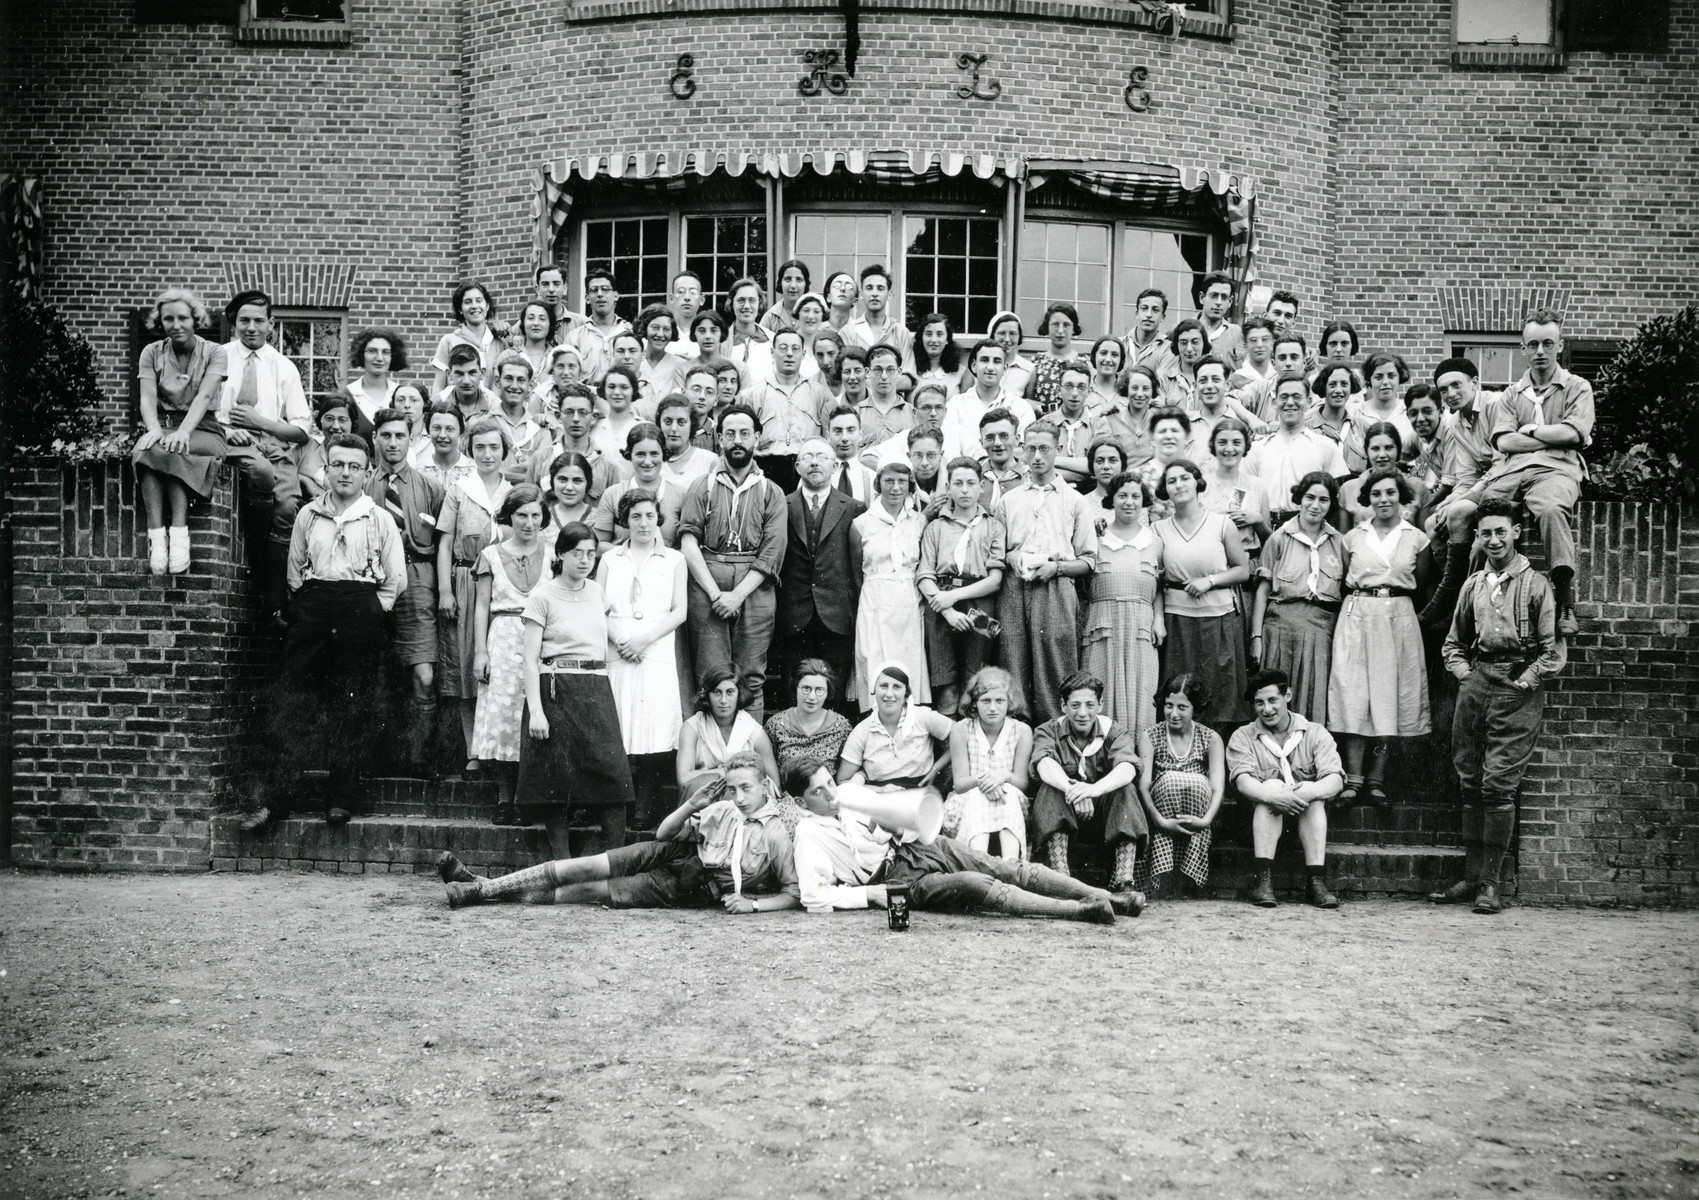 Group portrait of a Mizrachi religious Zionist youth group in The Netherlands.